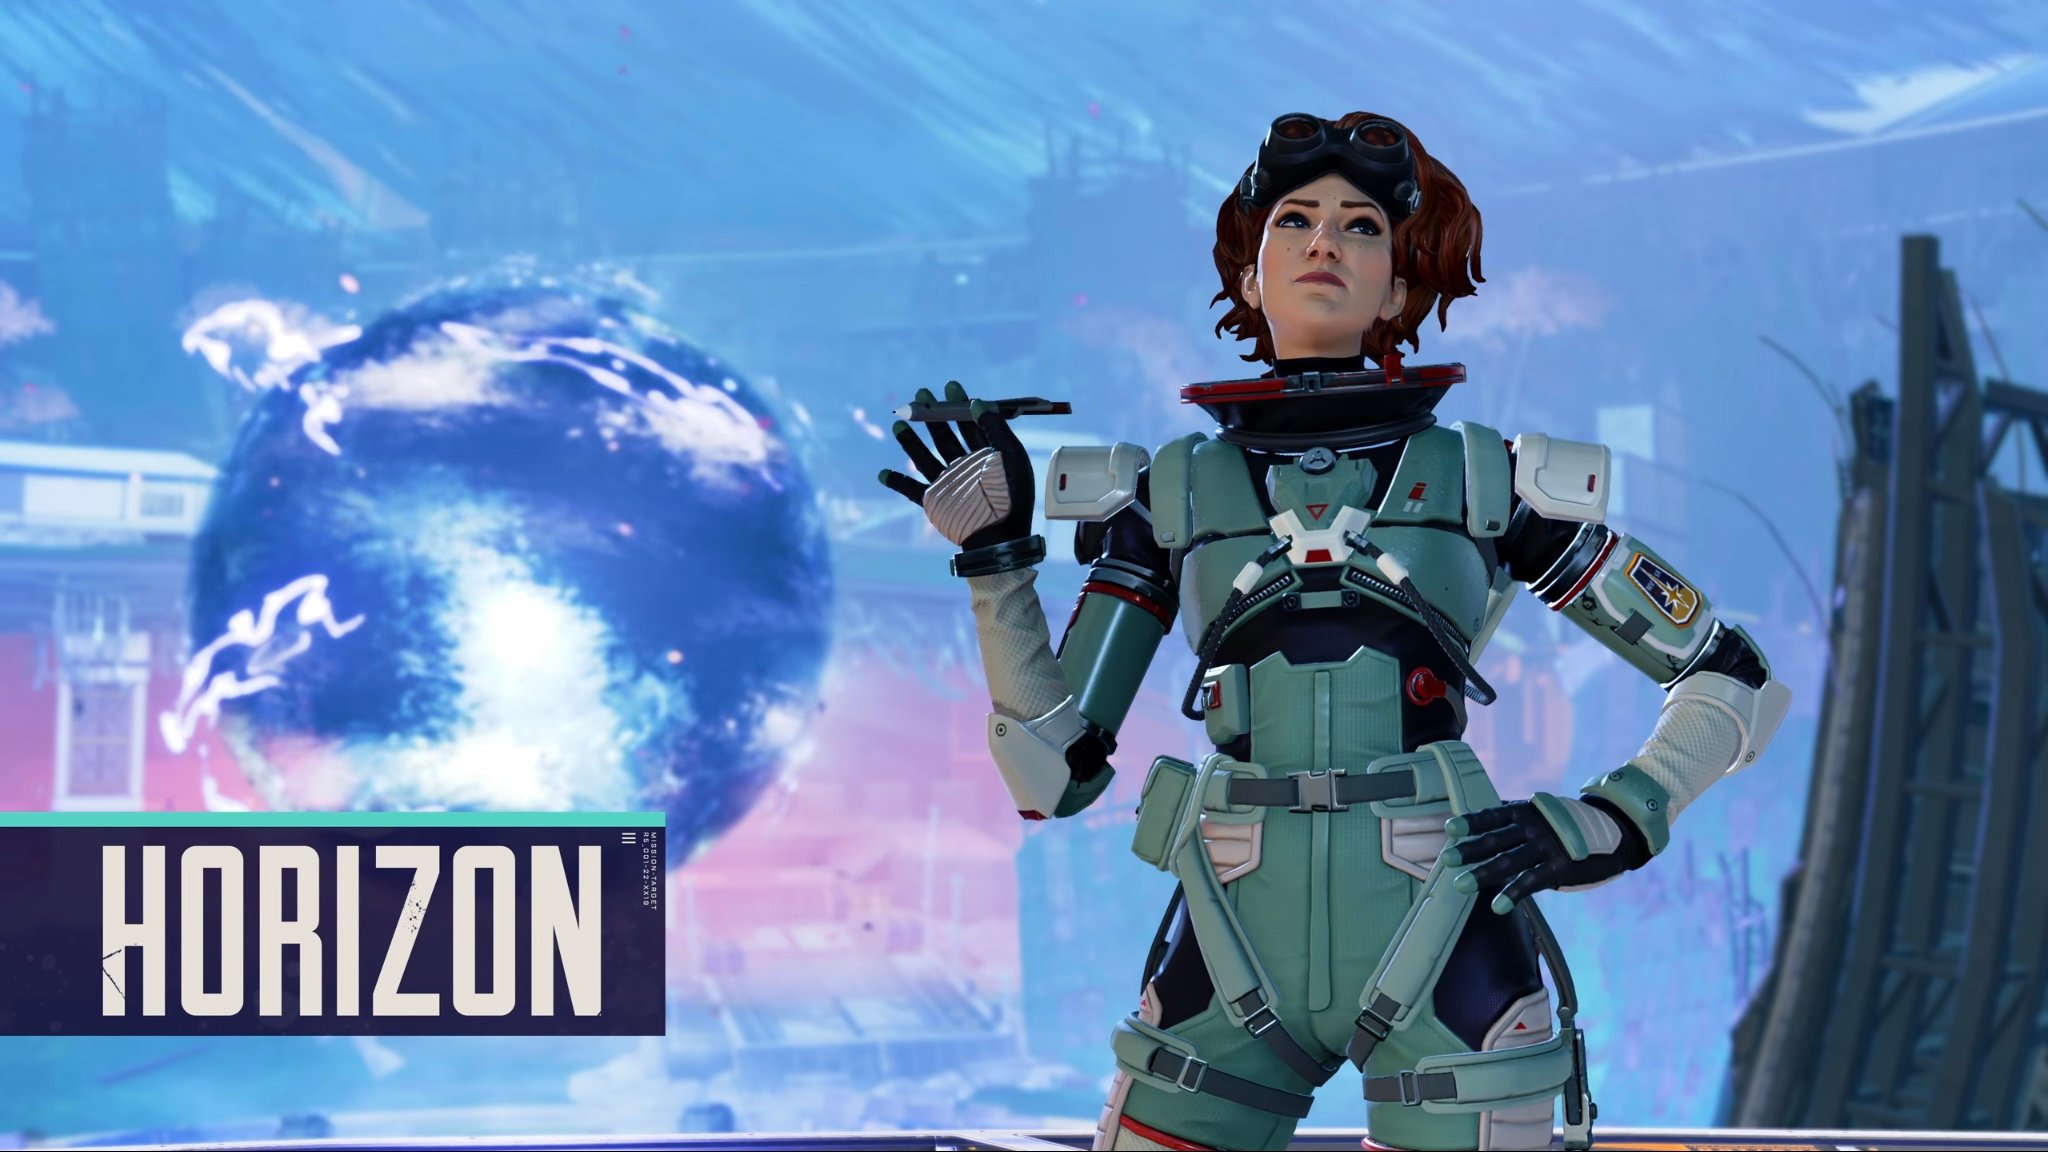 Apex Legends Mobile: Everything You Need To Know - Updated Jan. 2023